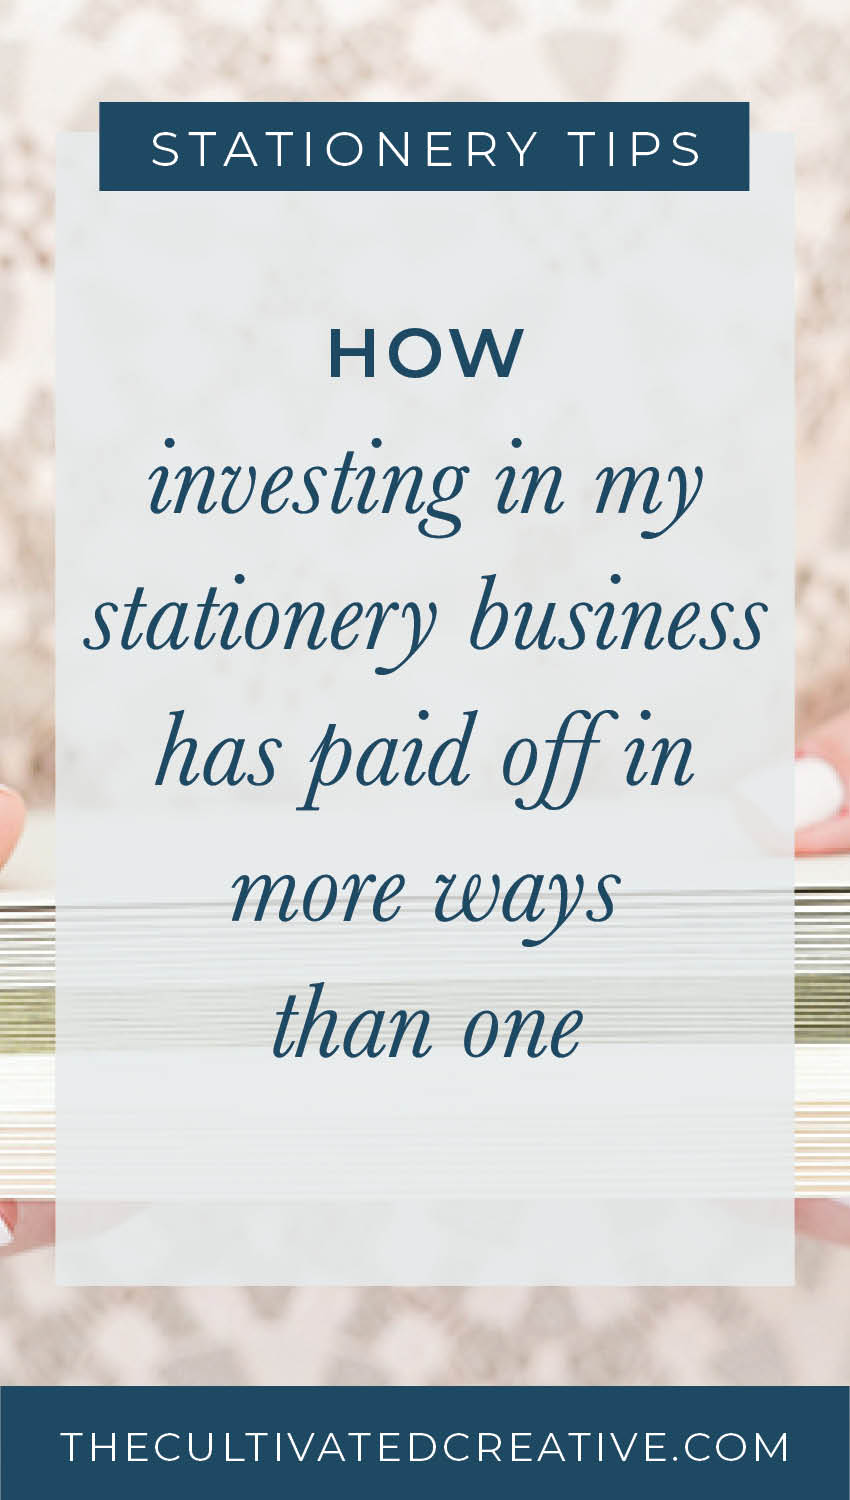 How investing in my stationery business has paid off and allowed it to grow to its full potential